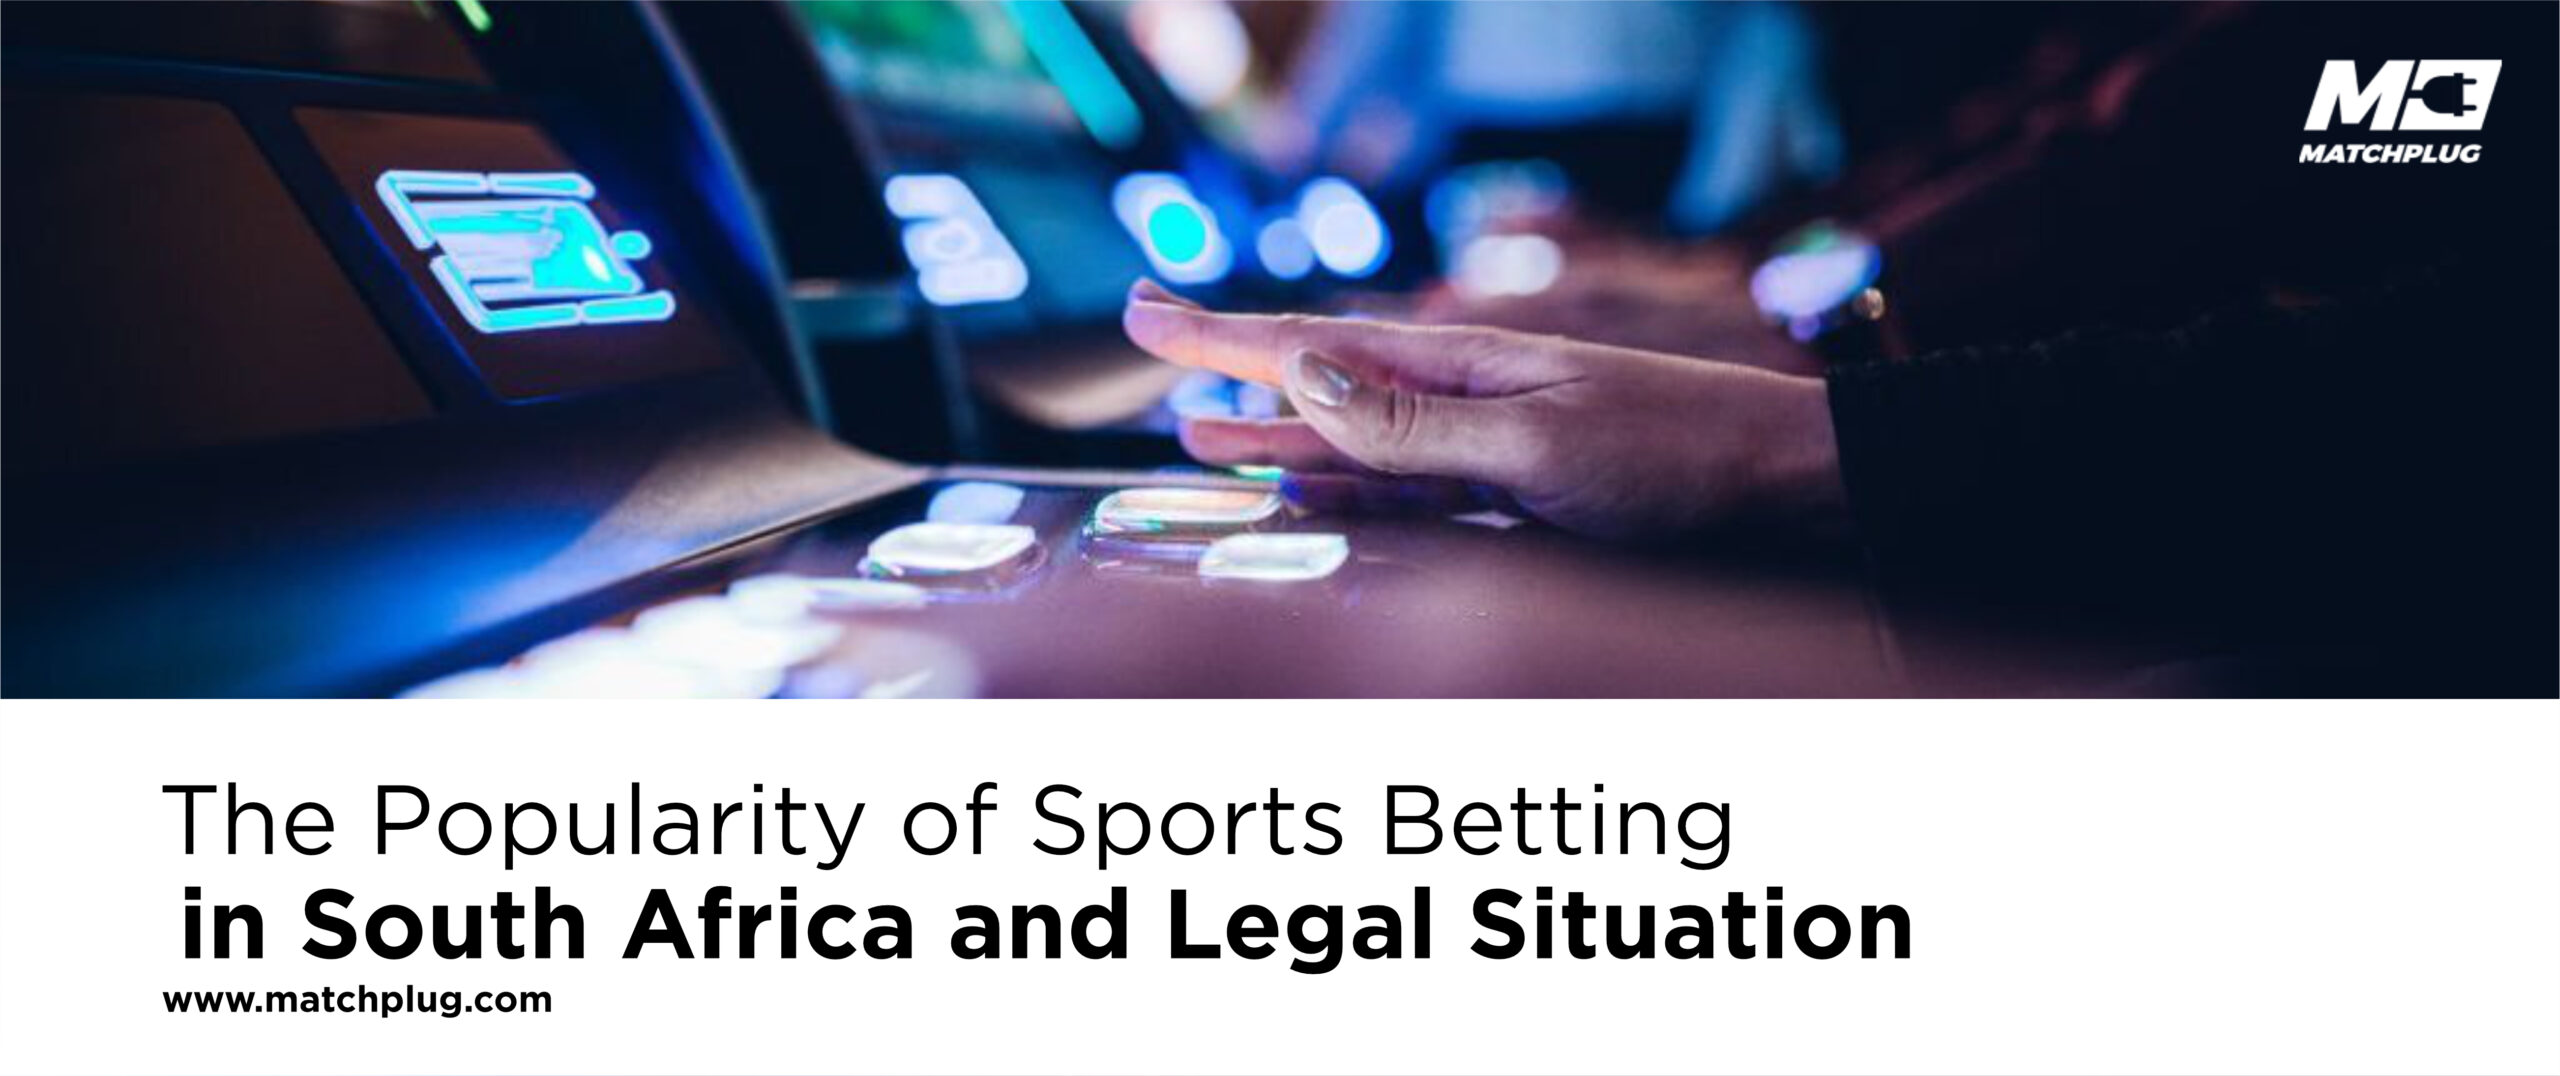 The Popularity of Sports Betting in South Africa and the Legal Situation